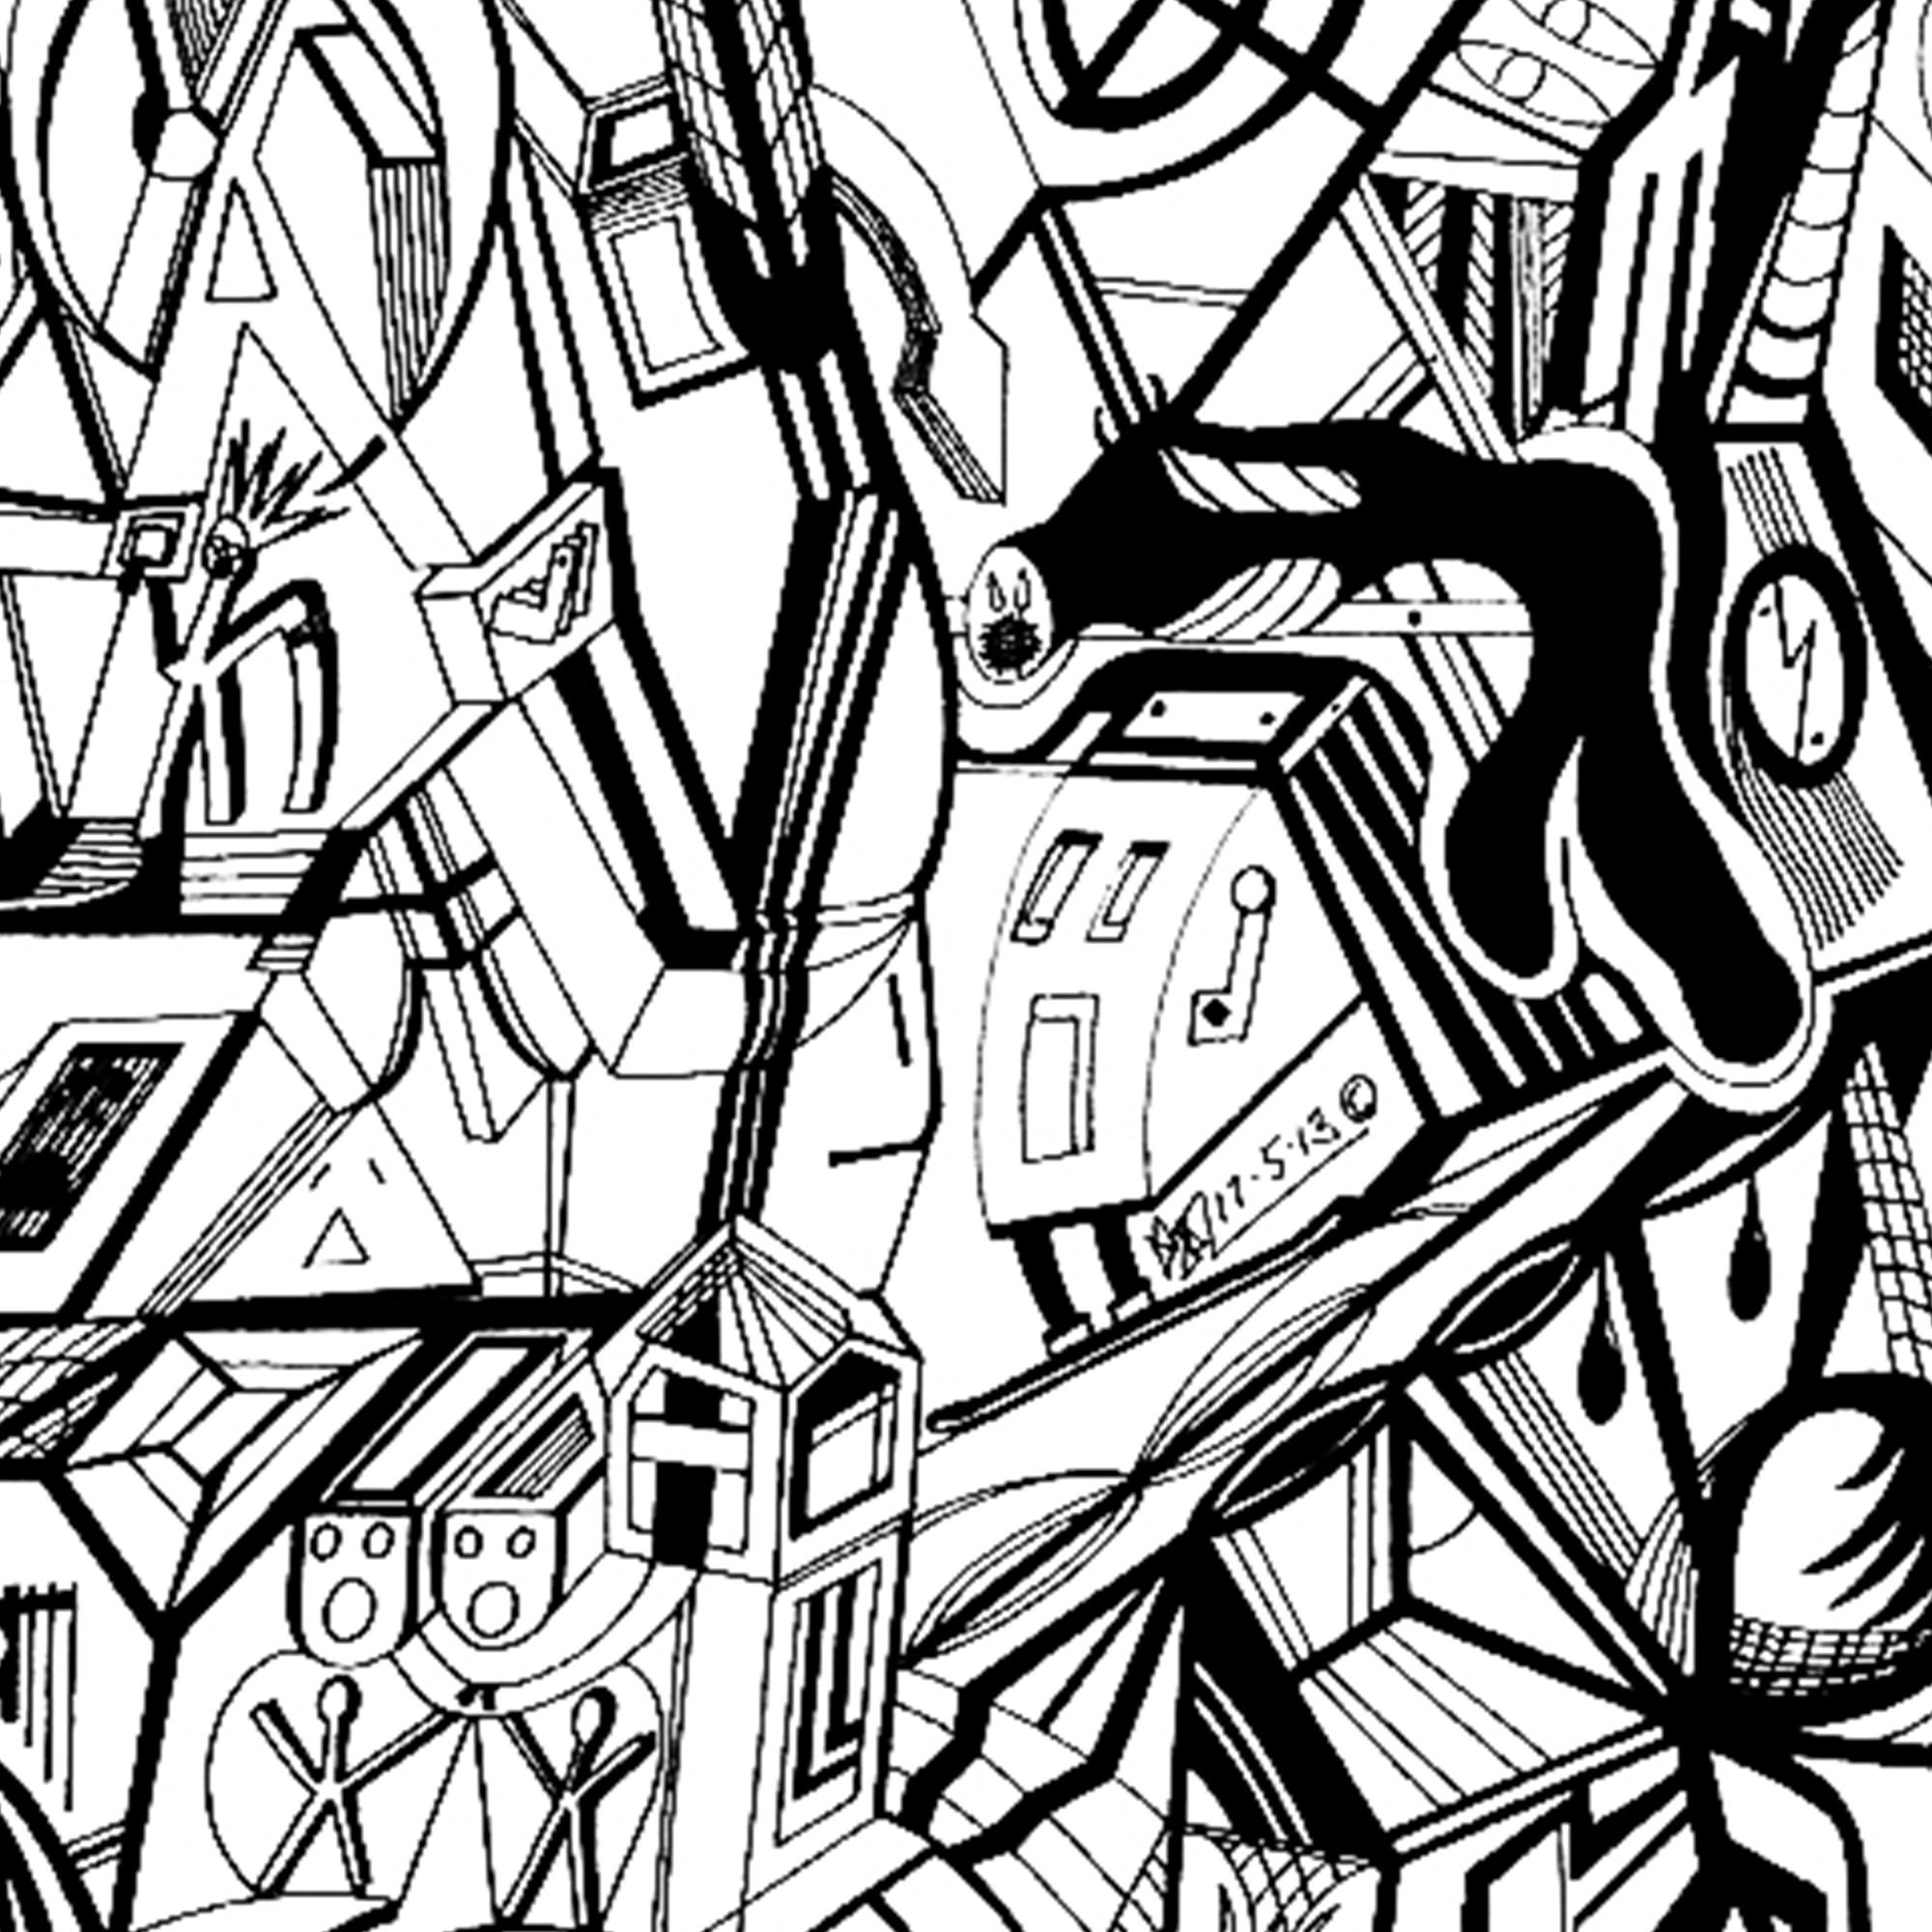 Close up of part of a fine art print from Jason Clarke titled 4 O'Clock Wall drawn with a black Pentel pen.